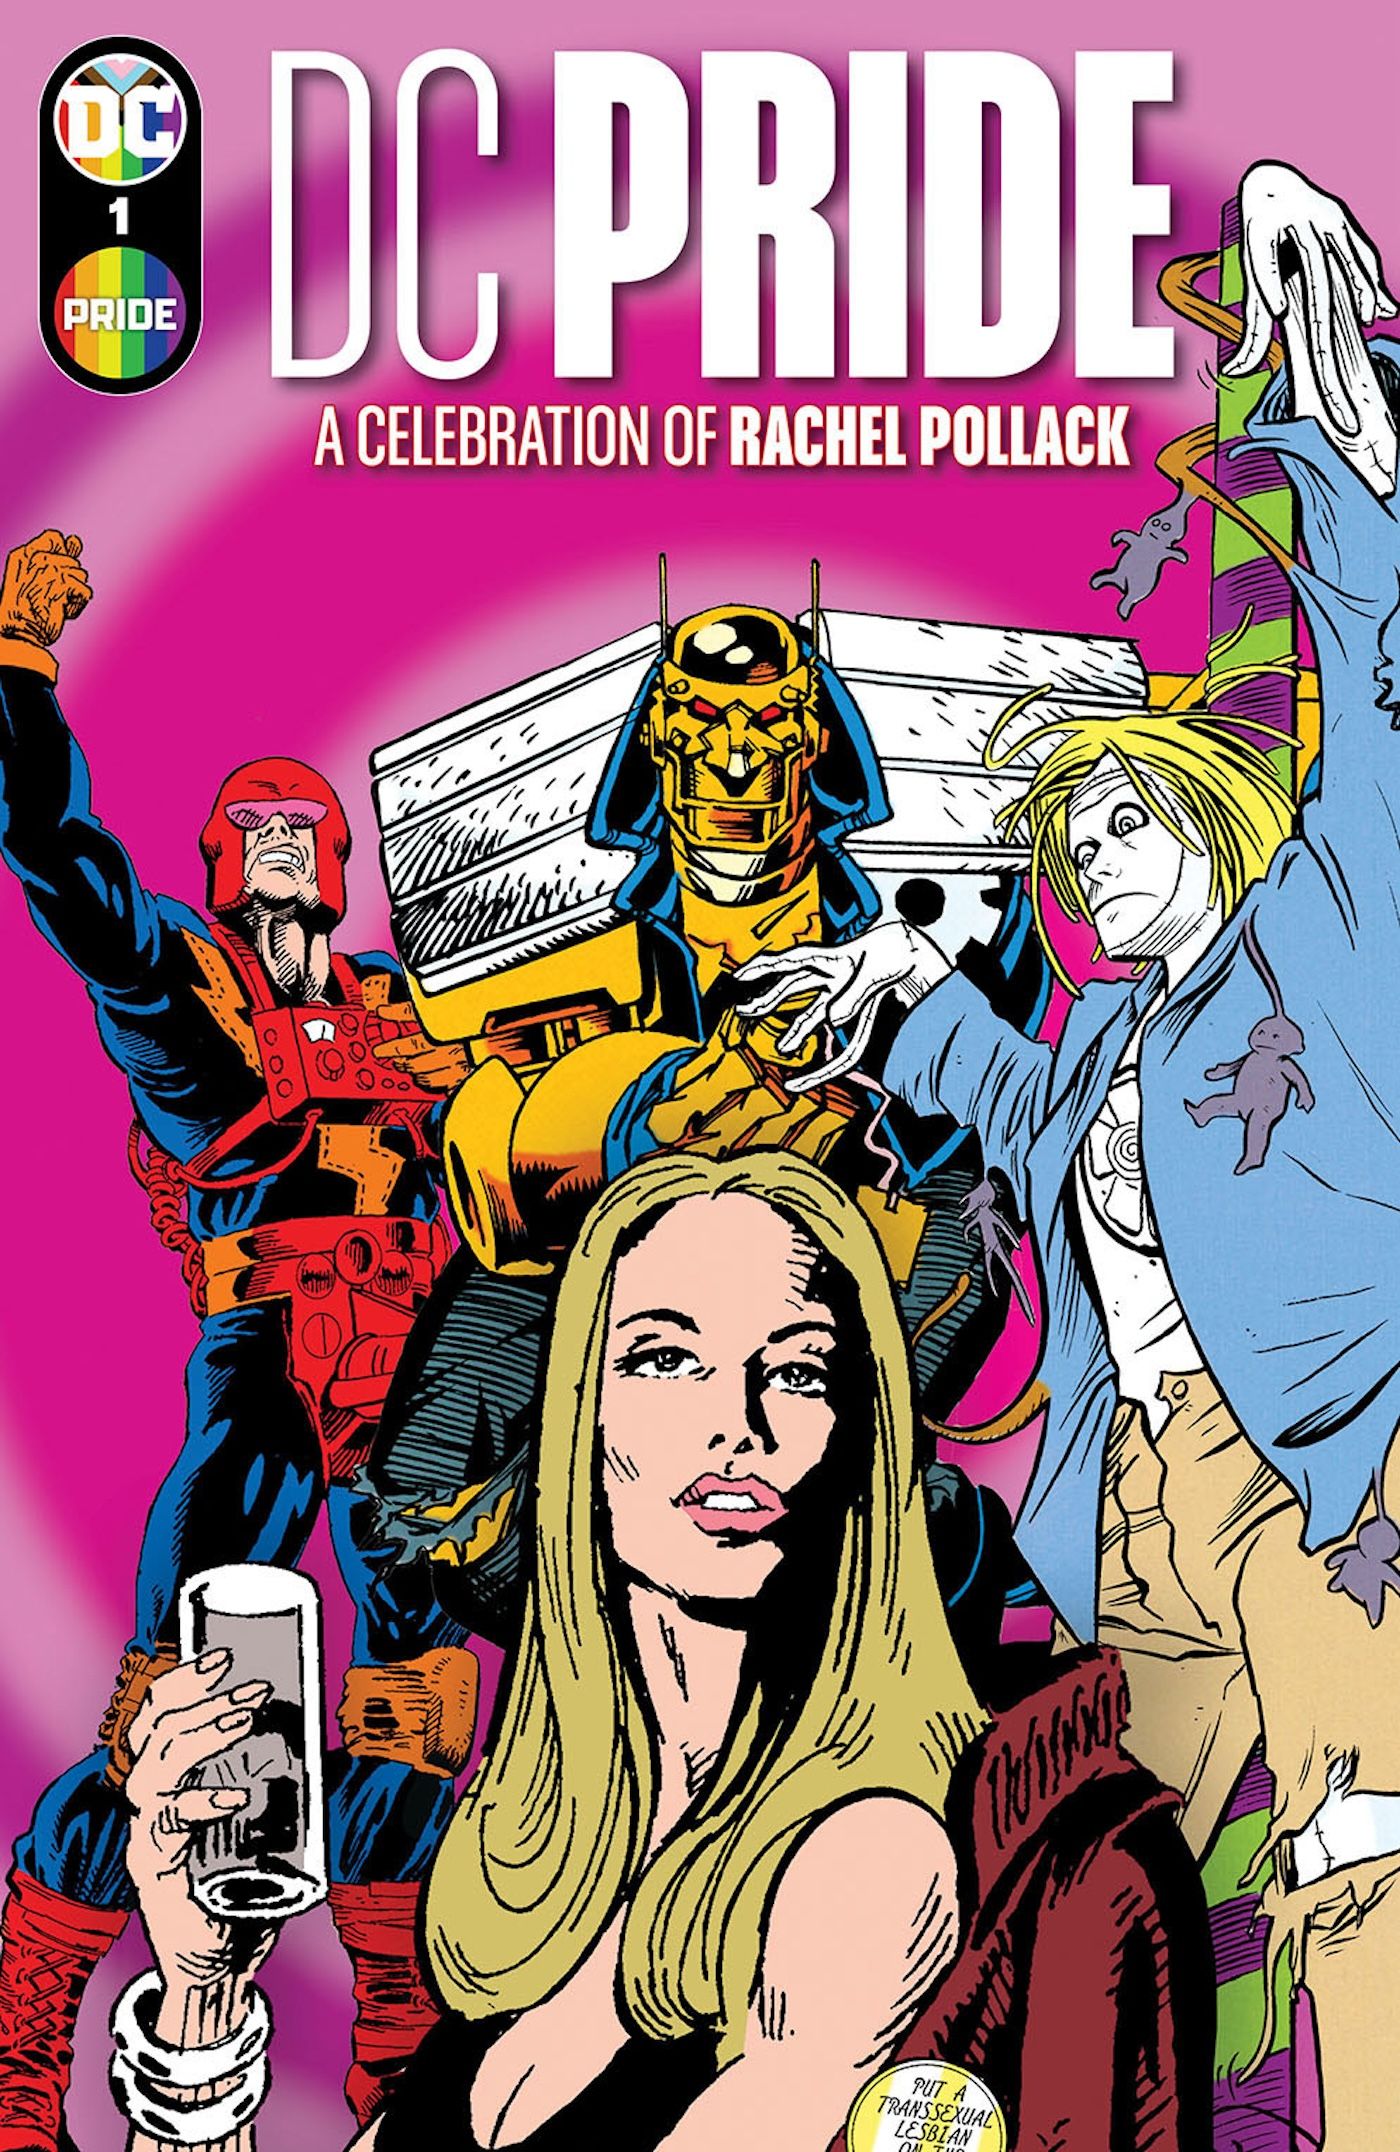 DC Pride A Celebration of Rachel Pollack 1 Main Cover: Doom Patrol superheroes pose together in front of a pink background.